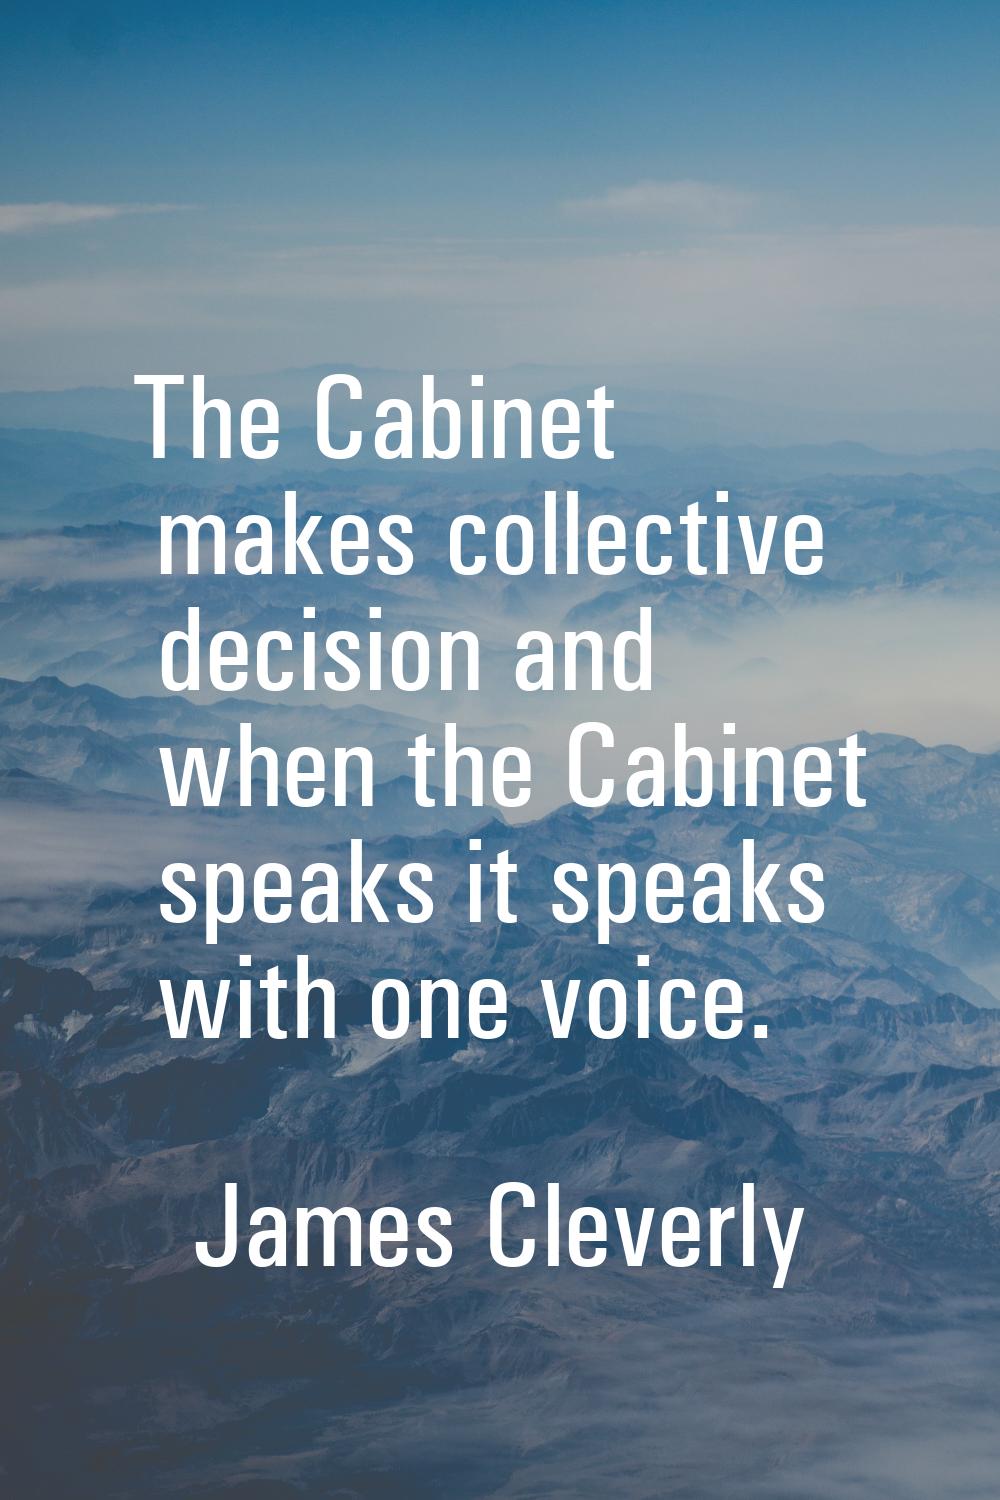 The Cabinet makes collective decision and when the Cabinet speaks it speaks with one voice.